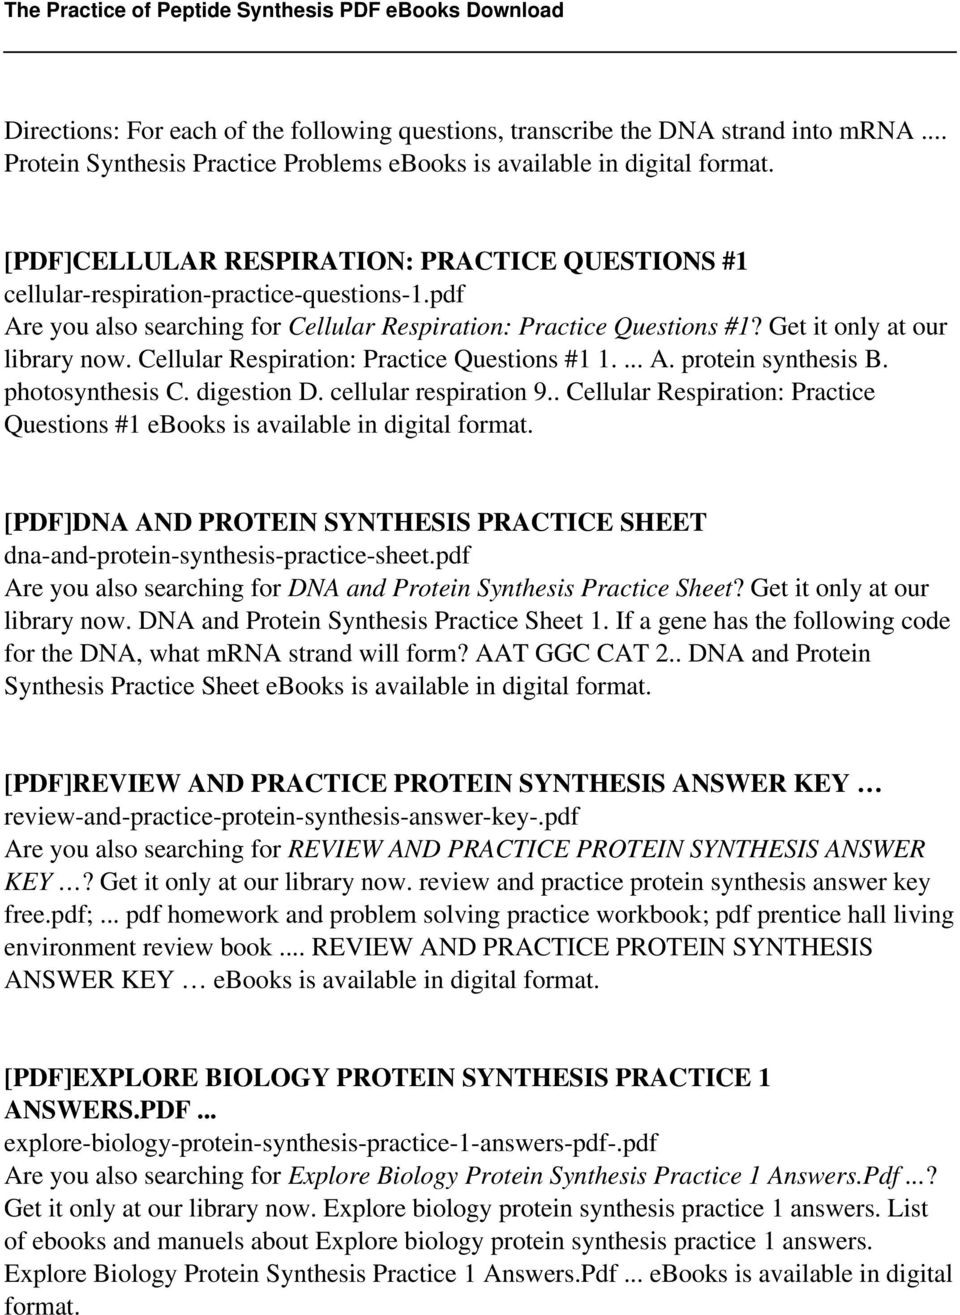 Protein Synthesis Review Worksheet Answers the Practice Of Peptide Synthesis Pdf Free Download